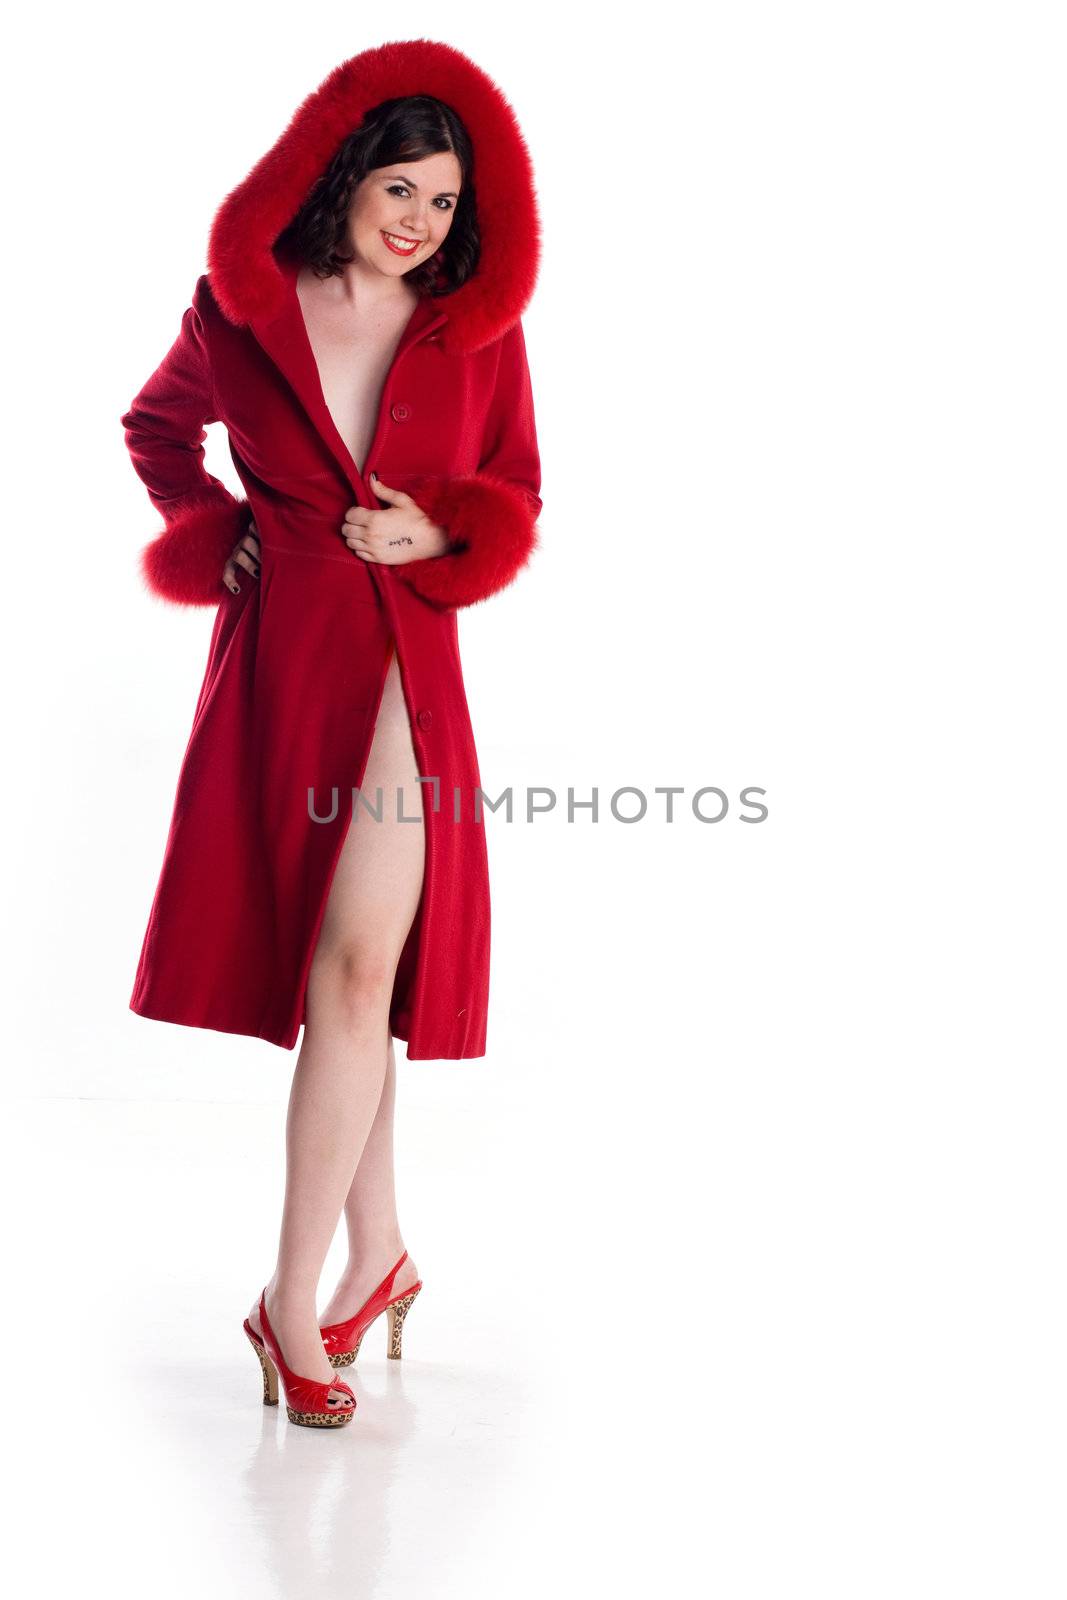 Cute girl in pin-up pose in red fur coat and heels